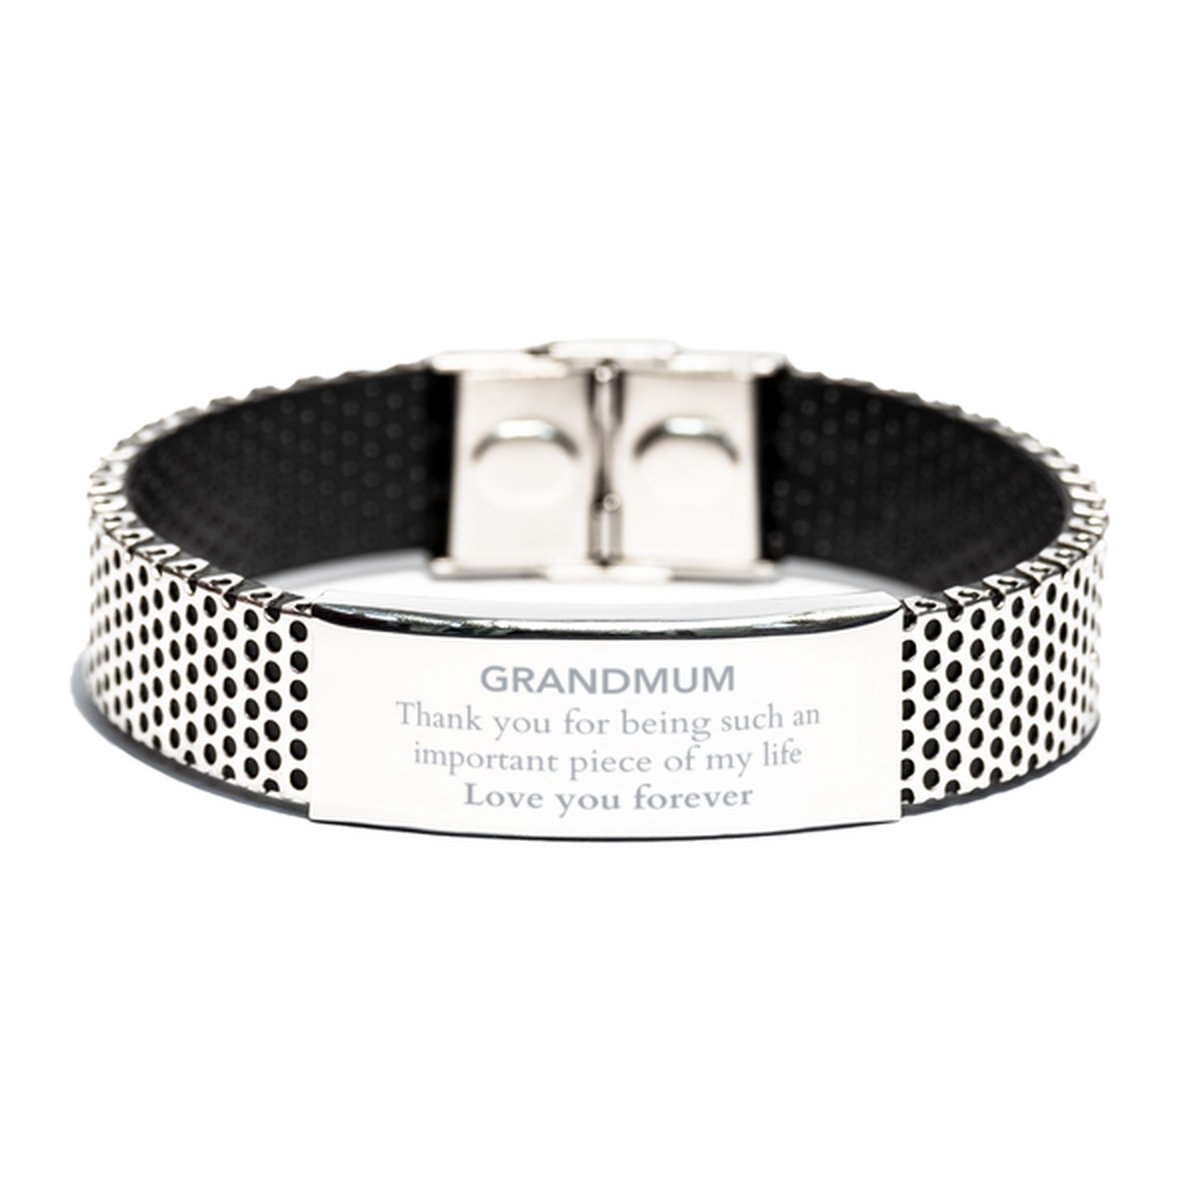 Appropriate Grandmum Stainless Steel Bracelet Epic Birthday Gifts for Grandmum Thank you for being such an important piece of my life Grandmum Christmas Mothers Fathers Day